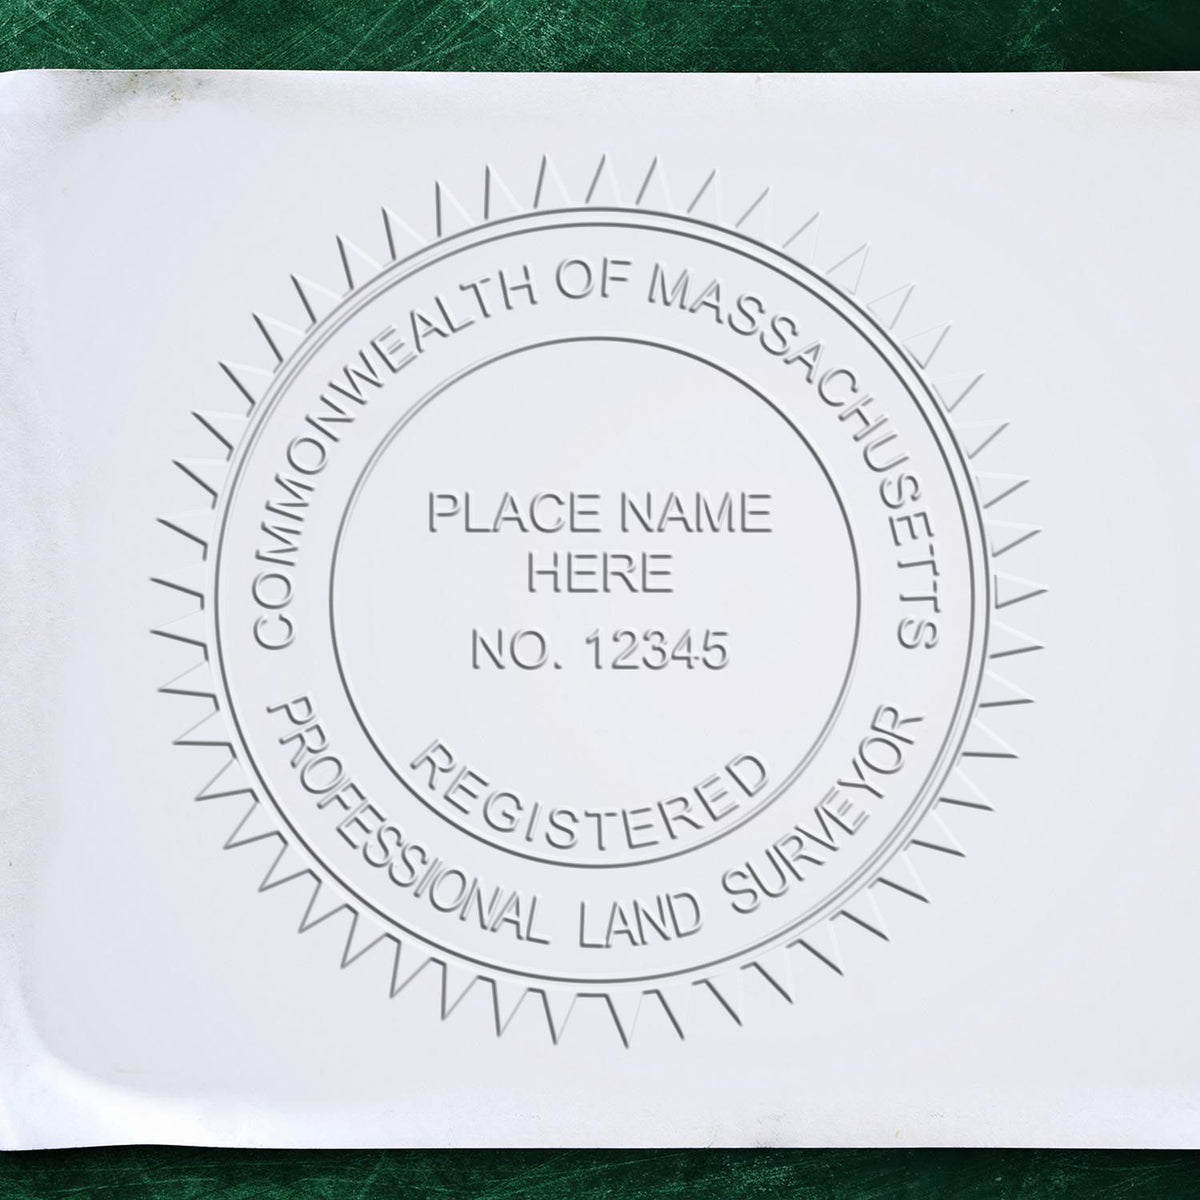 A photograph of the Hybrid Massachusetts Land Surveyor Seal stamp impression reveals a vivid, professional image of the on paper.